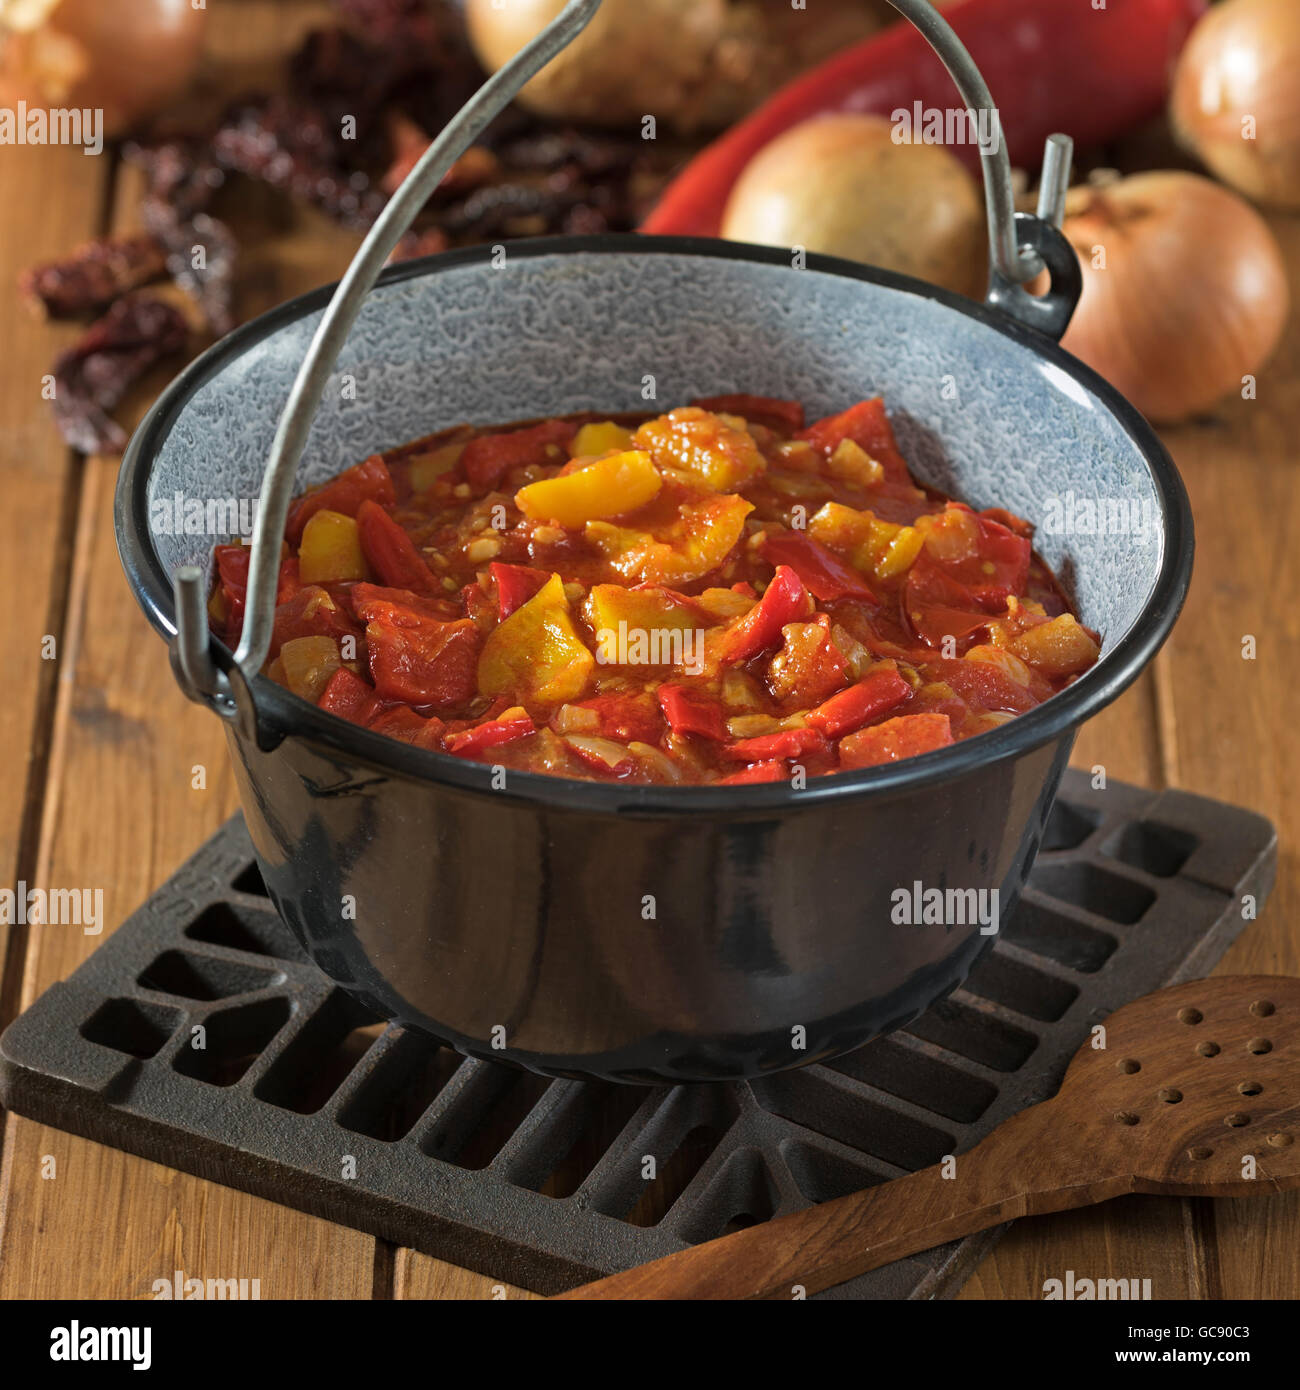 Lecsó. Hungarian pepper and tomato stew. Hungary Food Stock Photo